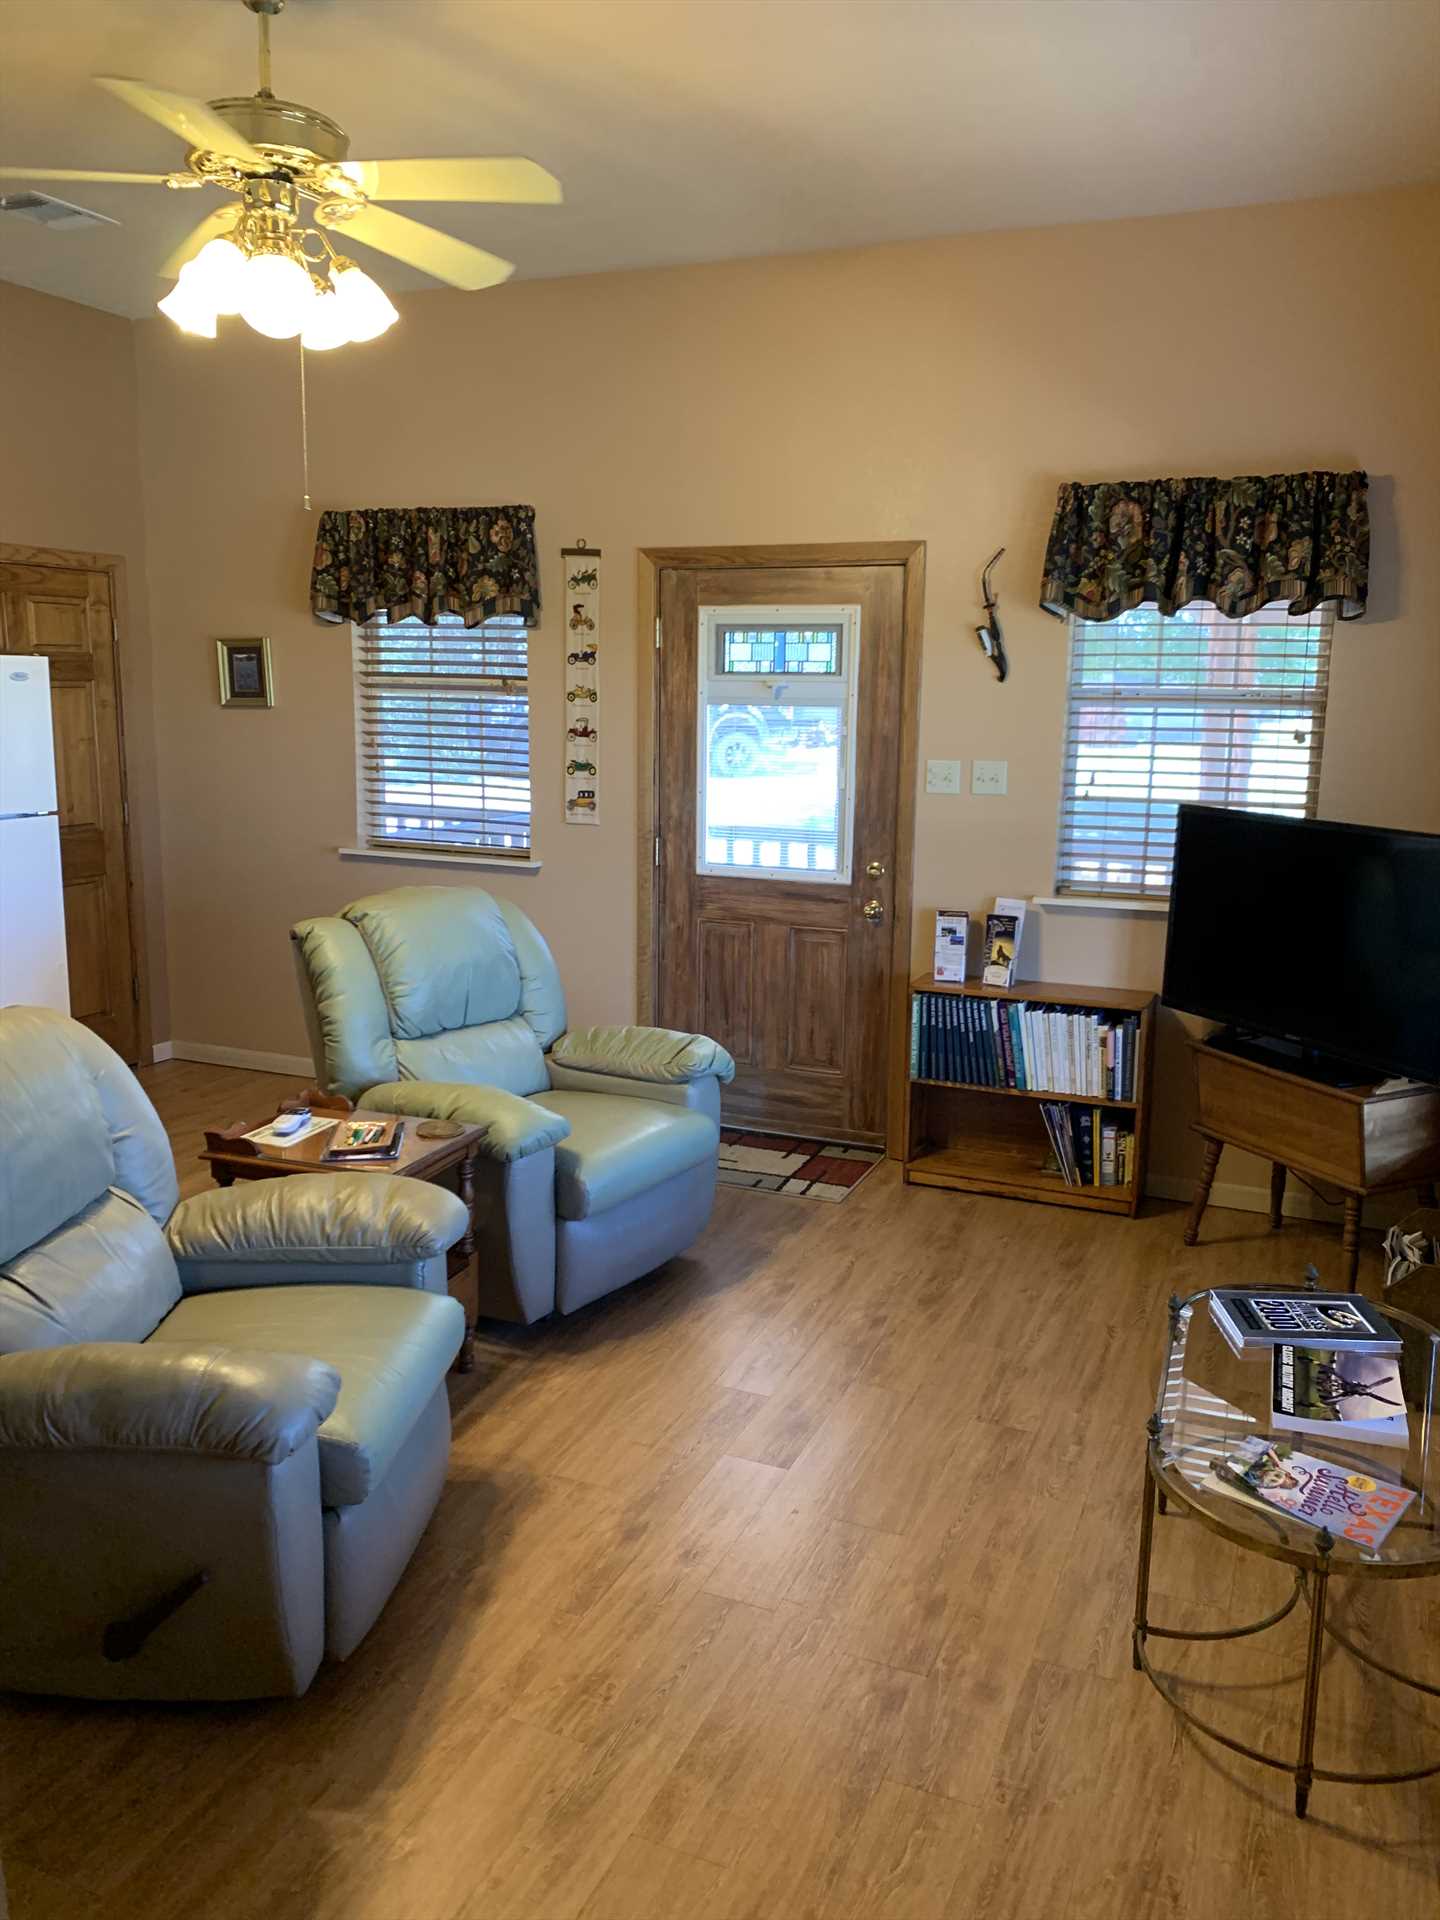                                                 Cozy, stylish, and comfortable, the living area's a wonderful place to recline and decompress.